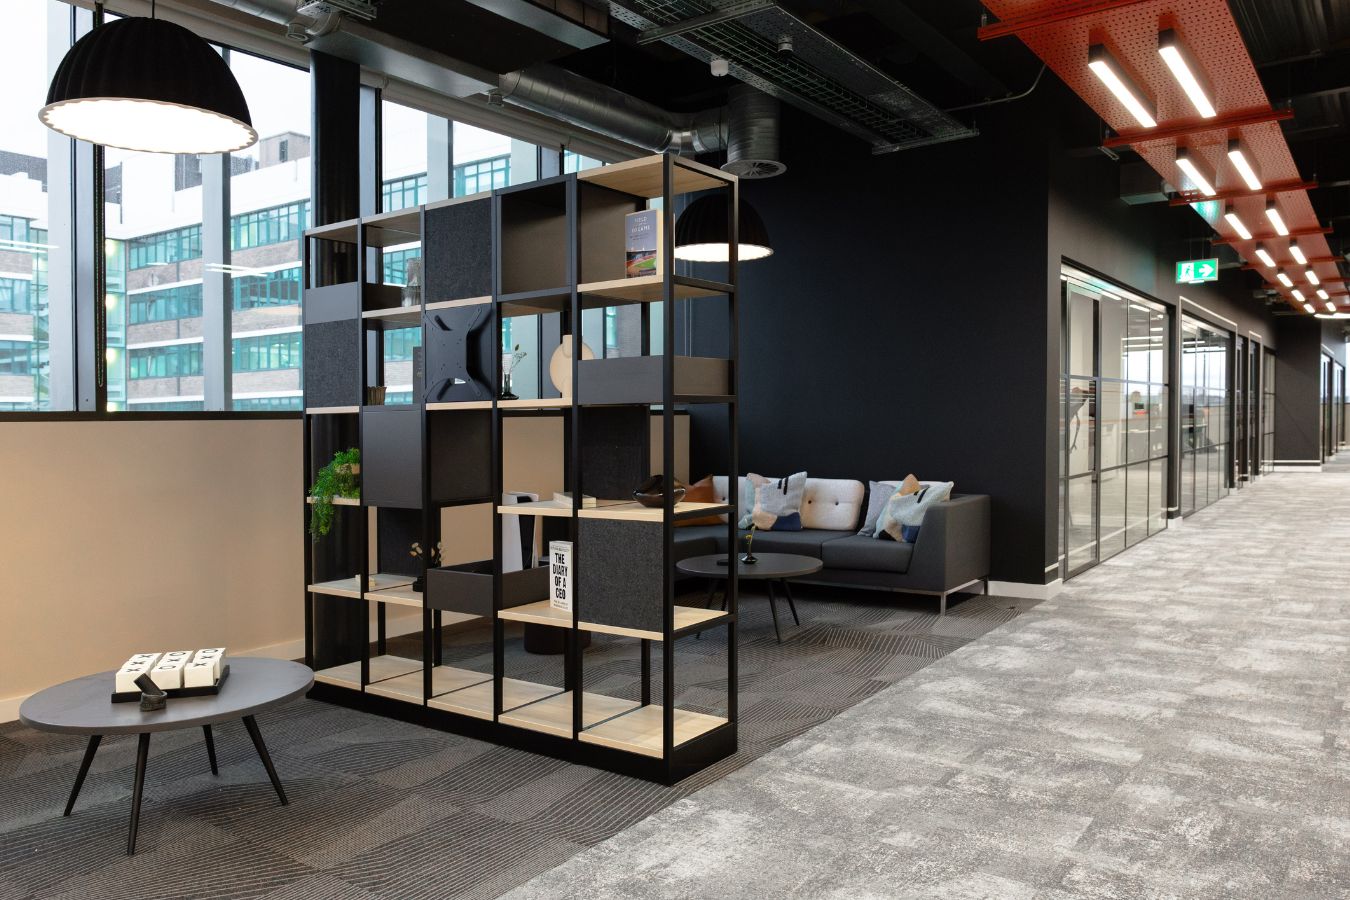 Agile working environments including breakout seating and modern conference rooms in SportFive -Manchester's new refurbishment done by Penketh Group